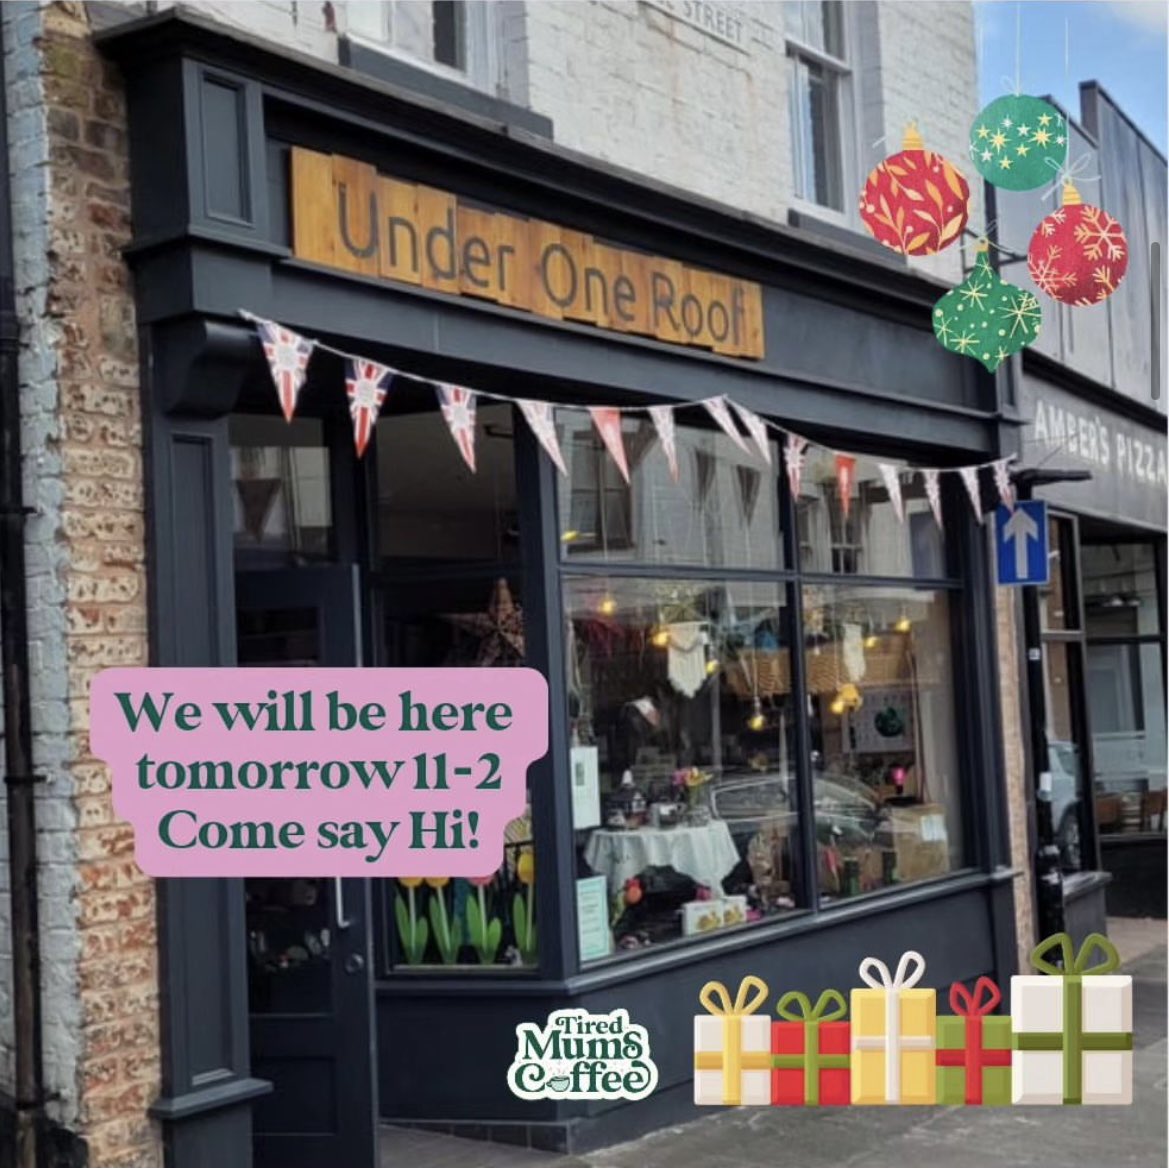 Meet The Makers Event Tomorrow 11-2 at Under One Roof Oswestry❤️

We’ll be there alongside other fabulous makers! 

Come & say hi, try some coffee, buy some presents & have a mince pie! What more could you want on a Saturday?!

#meetthemakers #Christmas